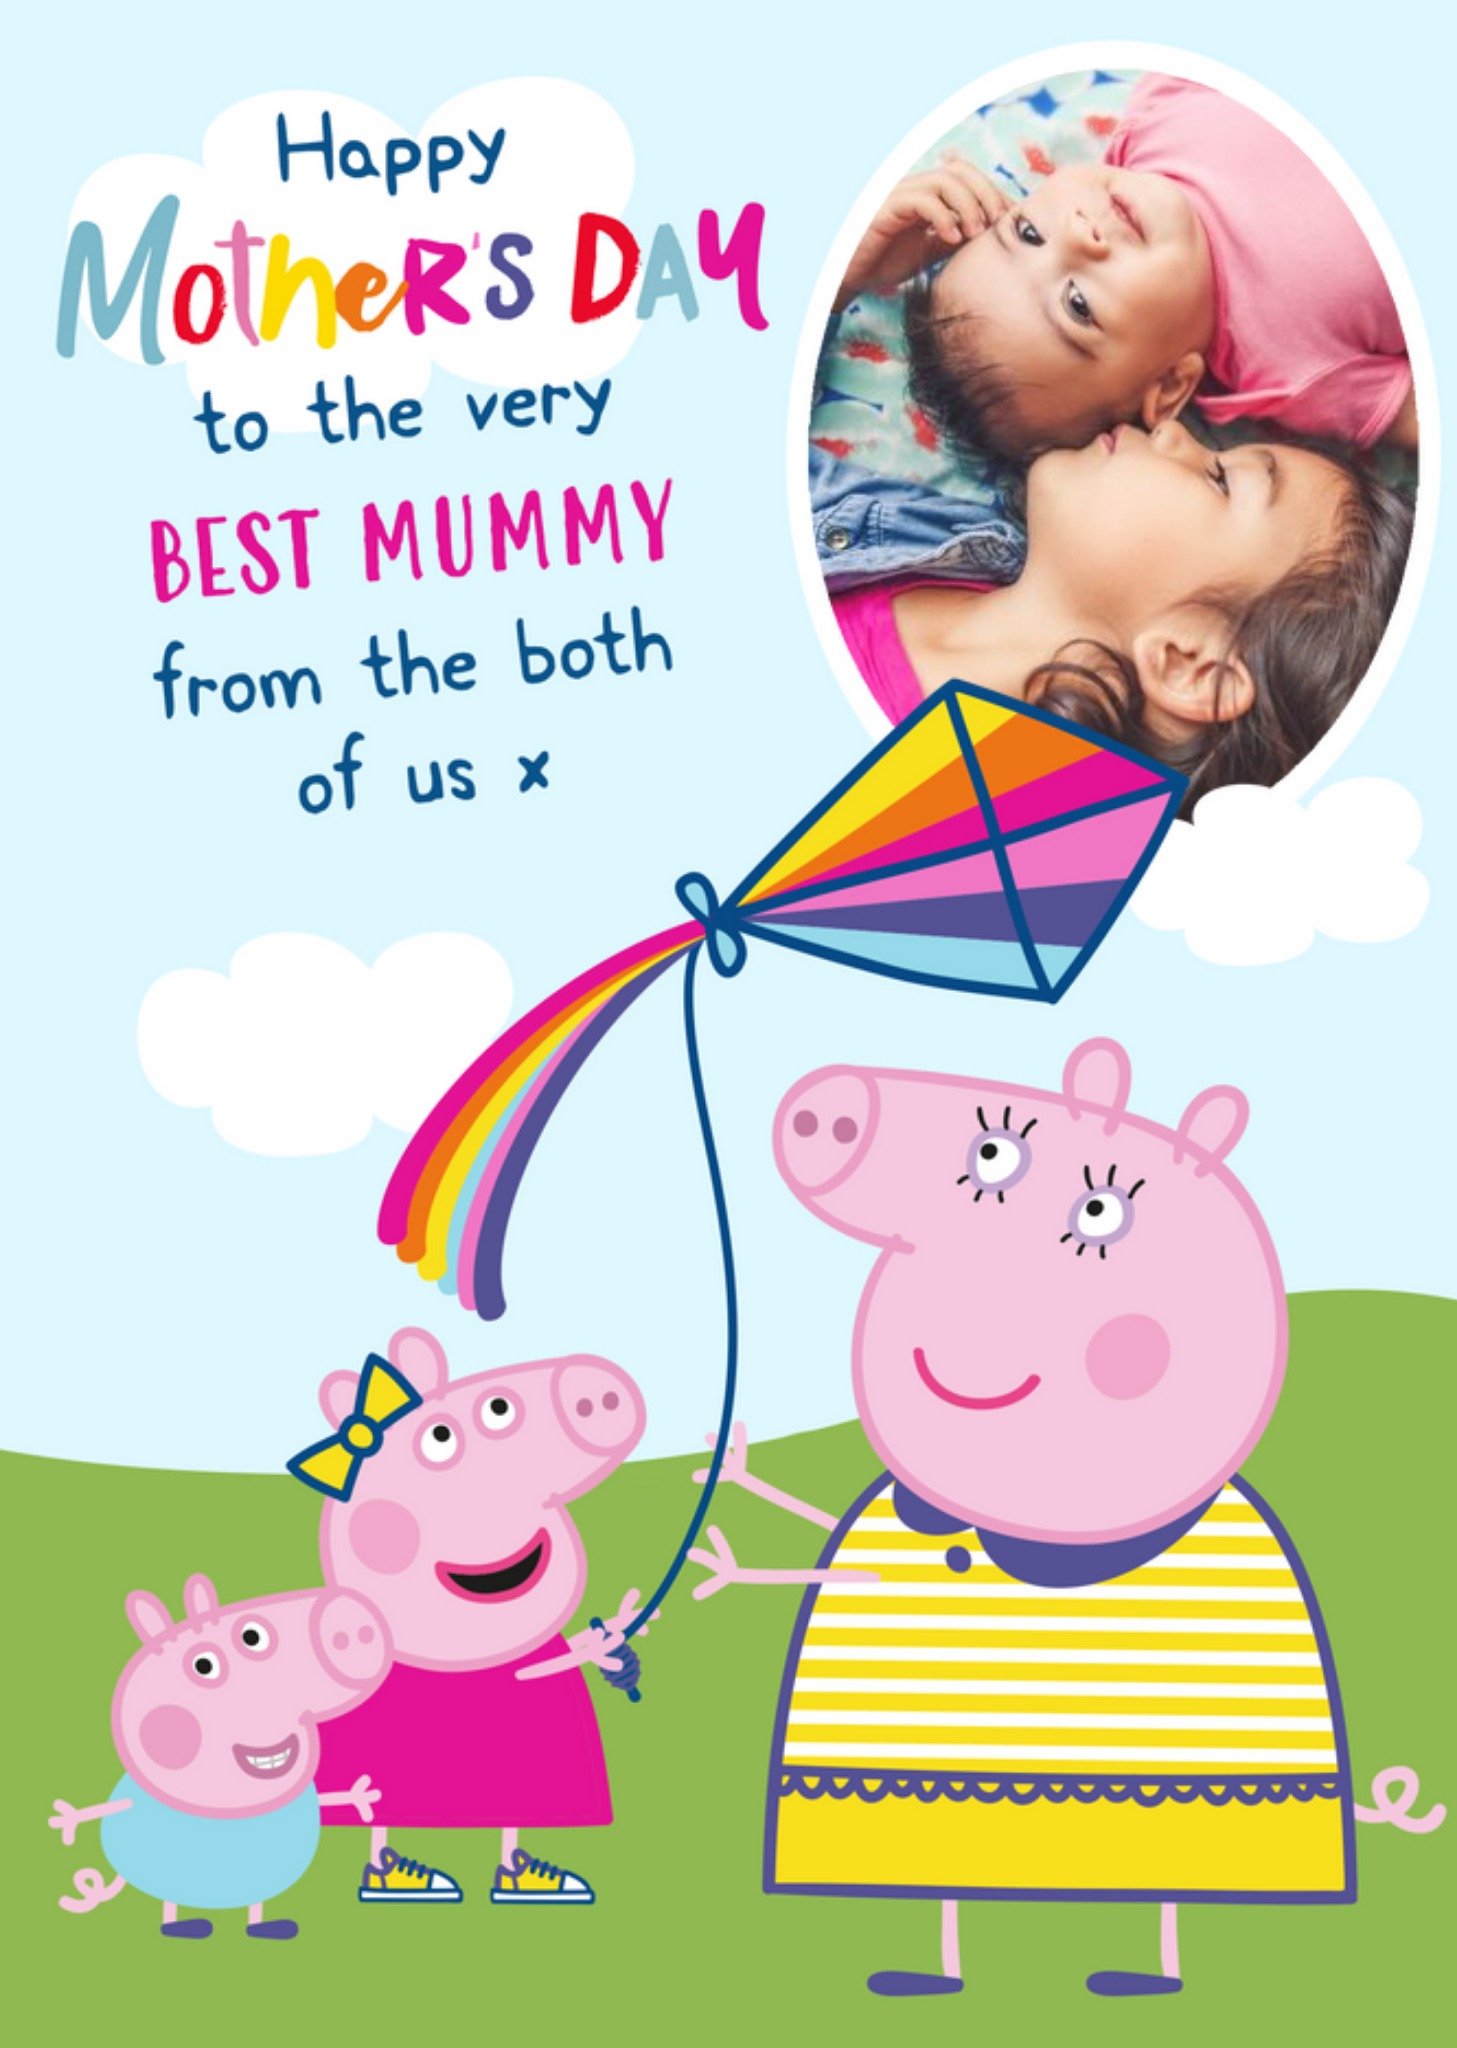 Cute Peppa Pig And George From The Both Of Us Mother's Day Card For The Best Mummy, Large